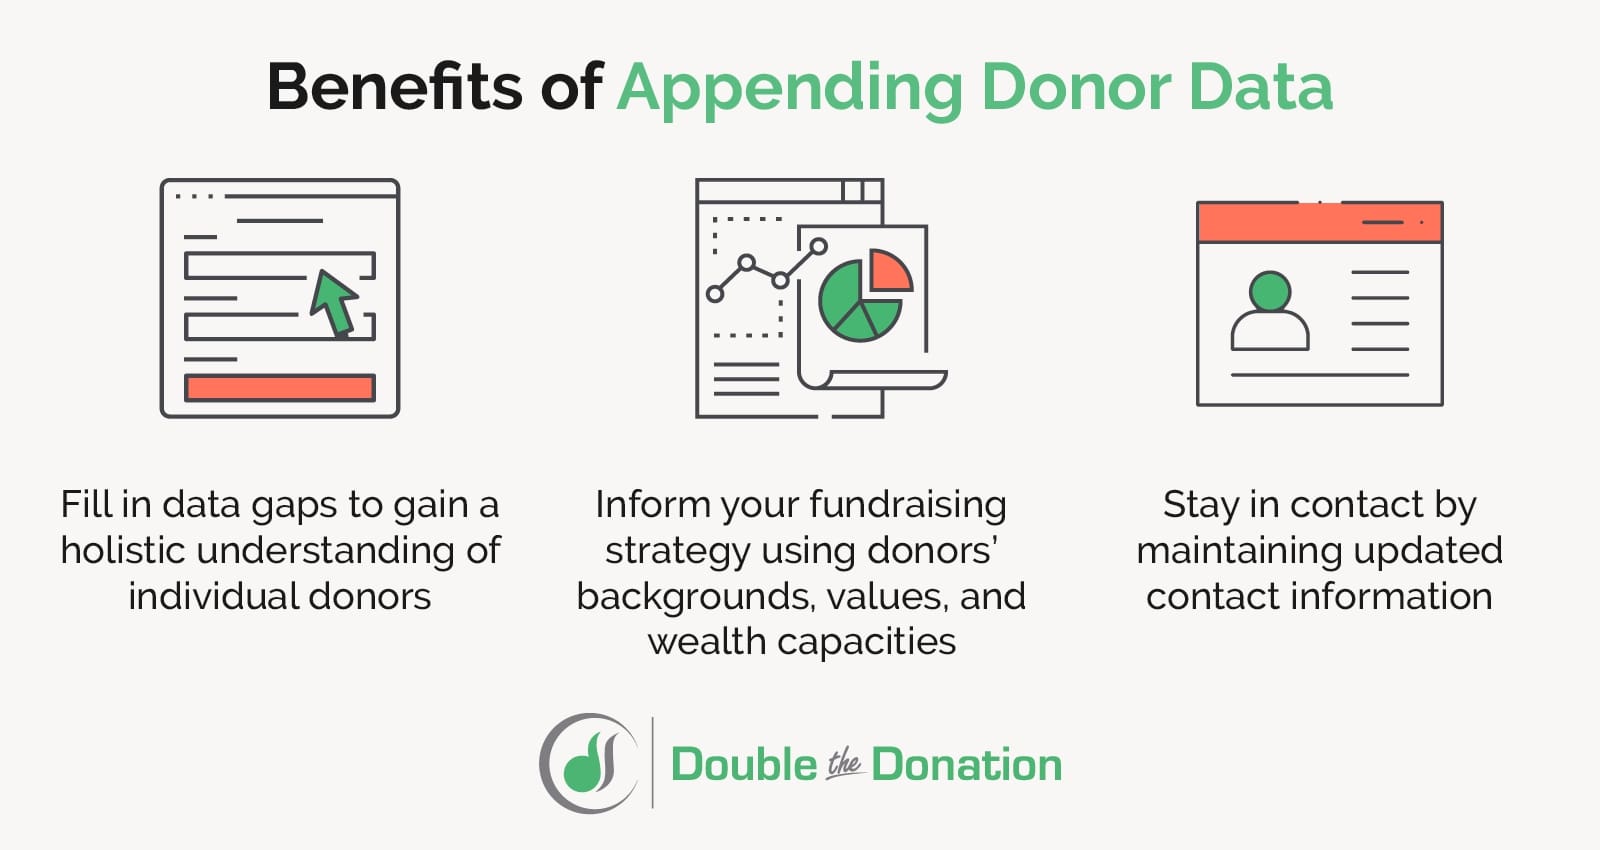 Benefits of appending donor data